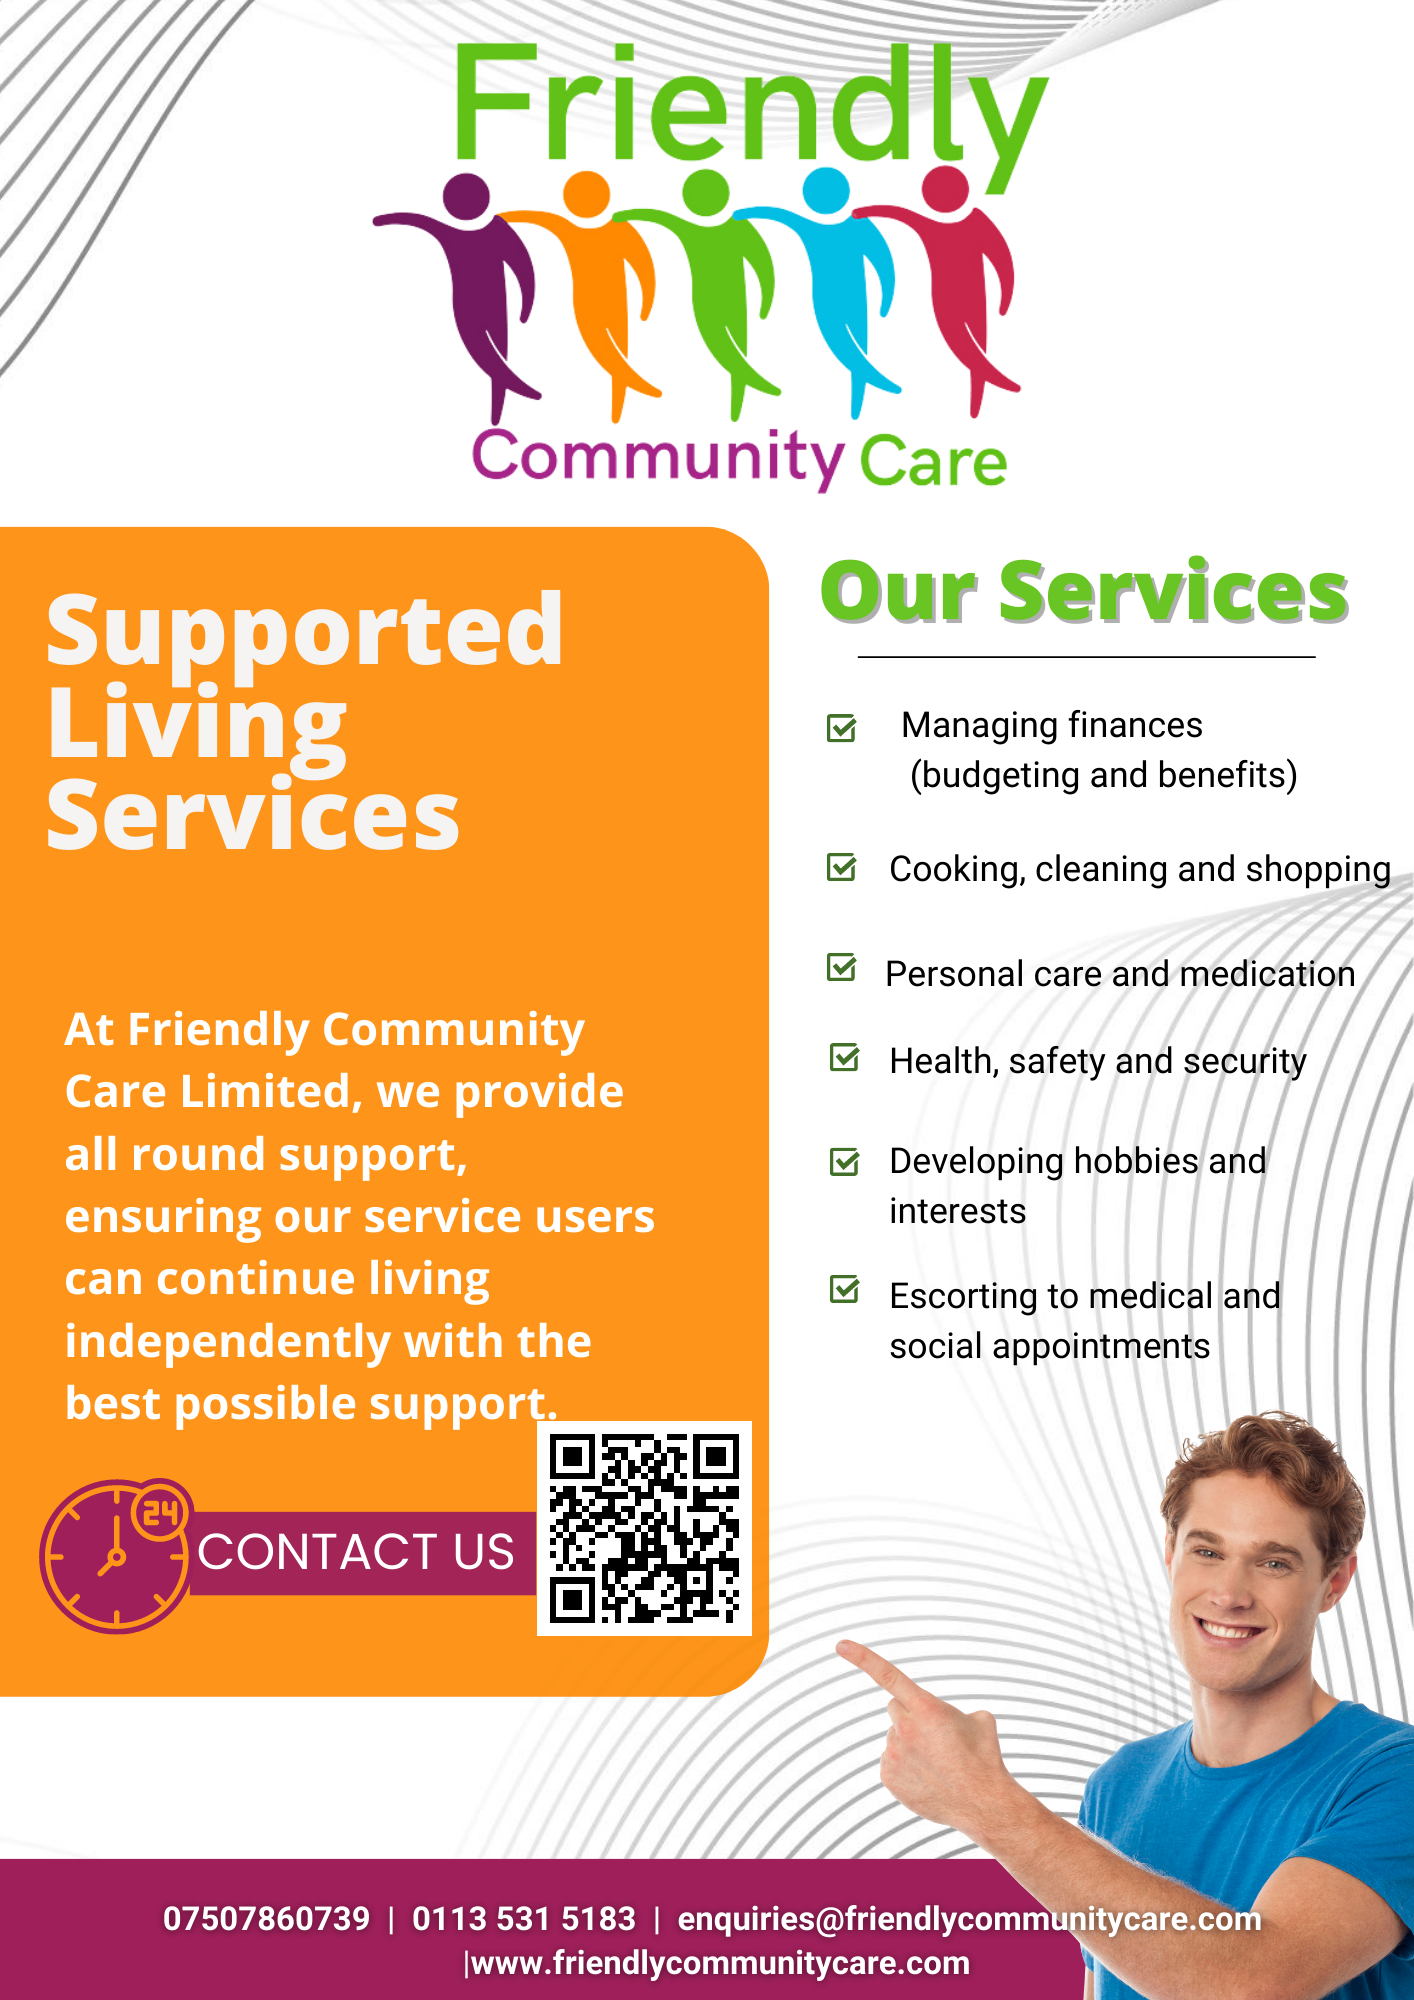 The logo offers the services that Friendly Community Care offers